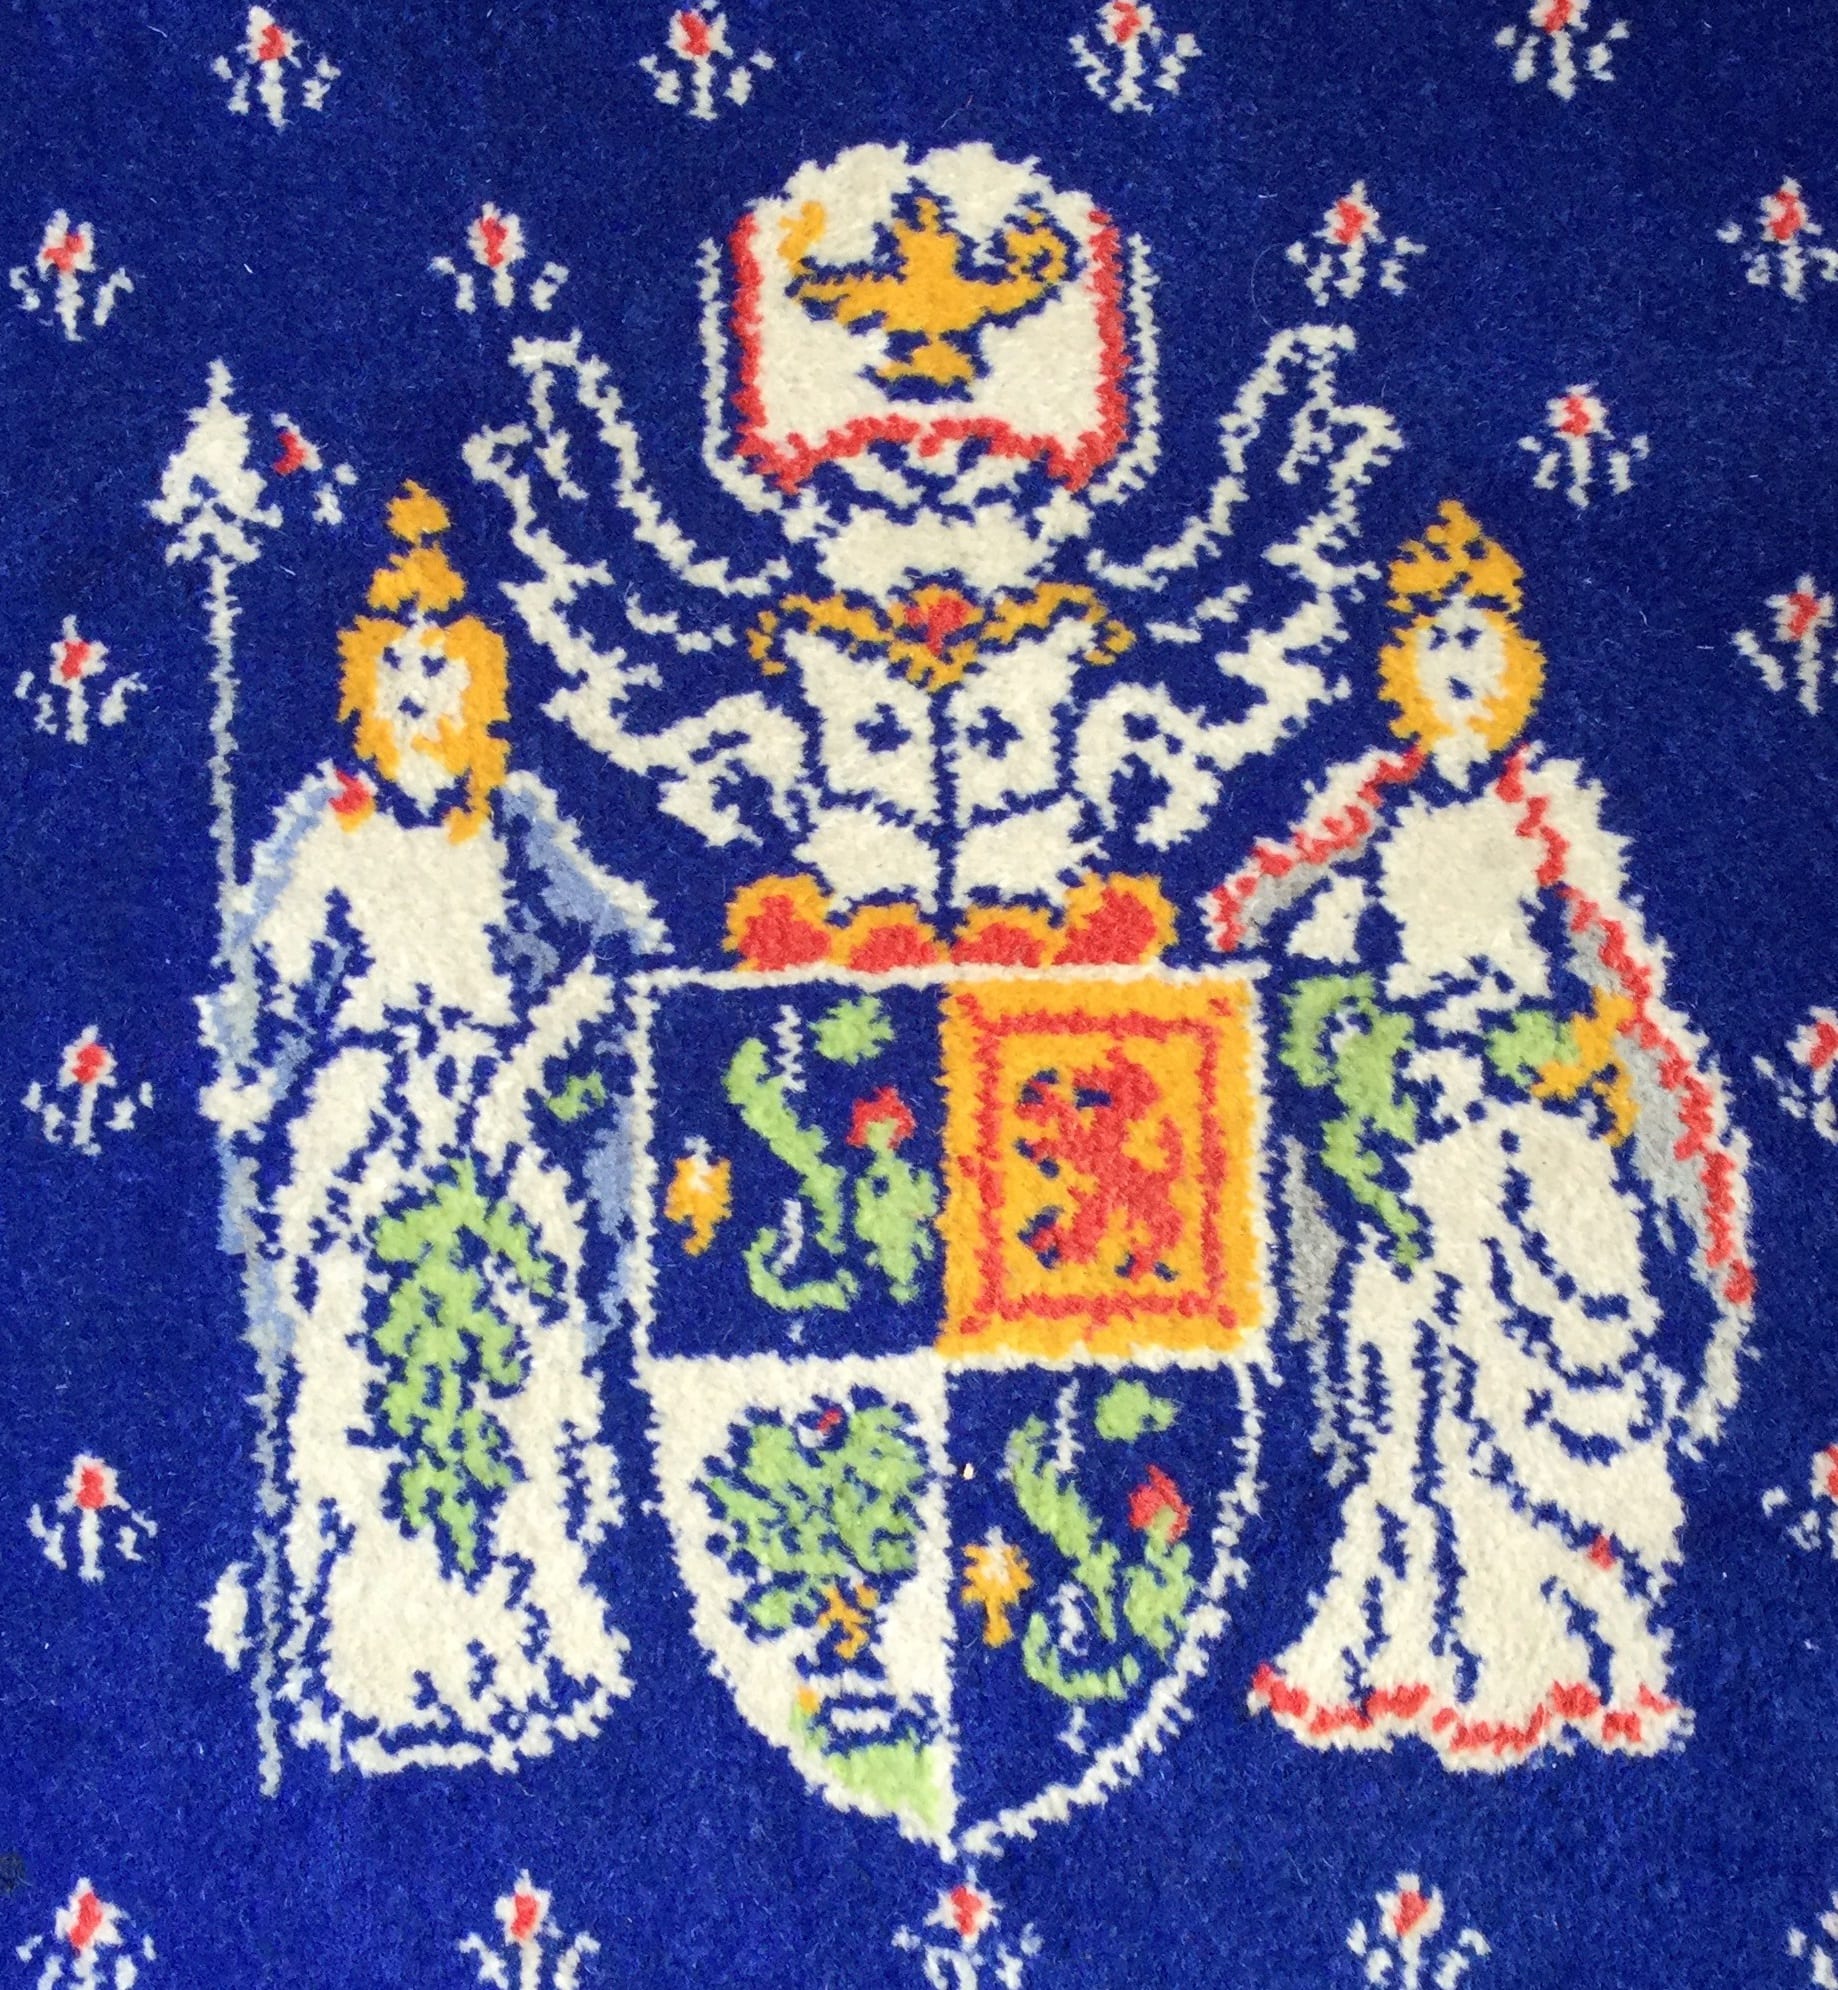 Logo of the College featured on the Lock Room carpet